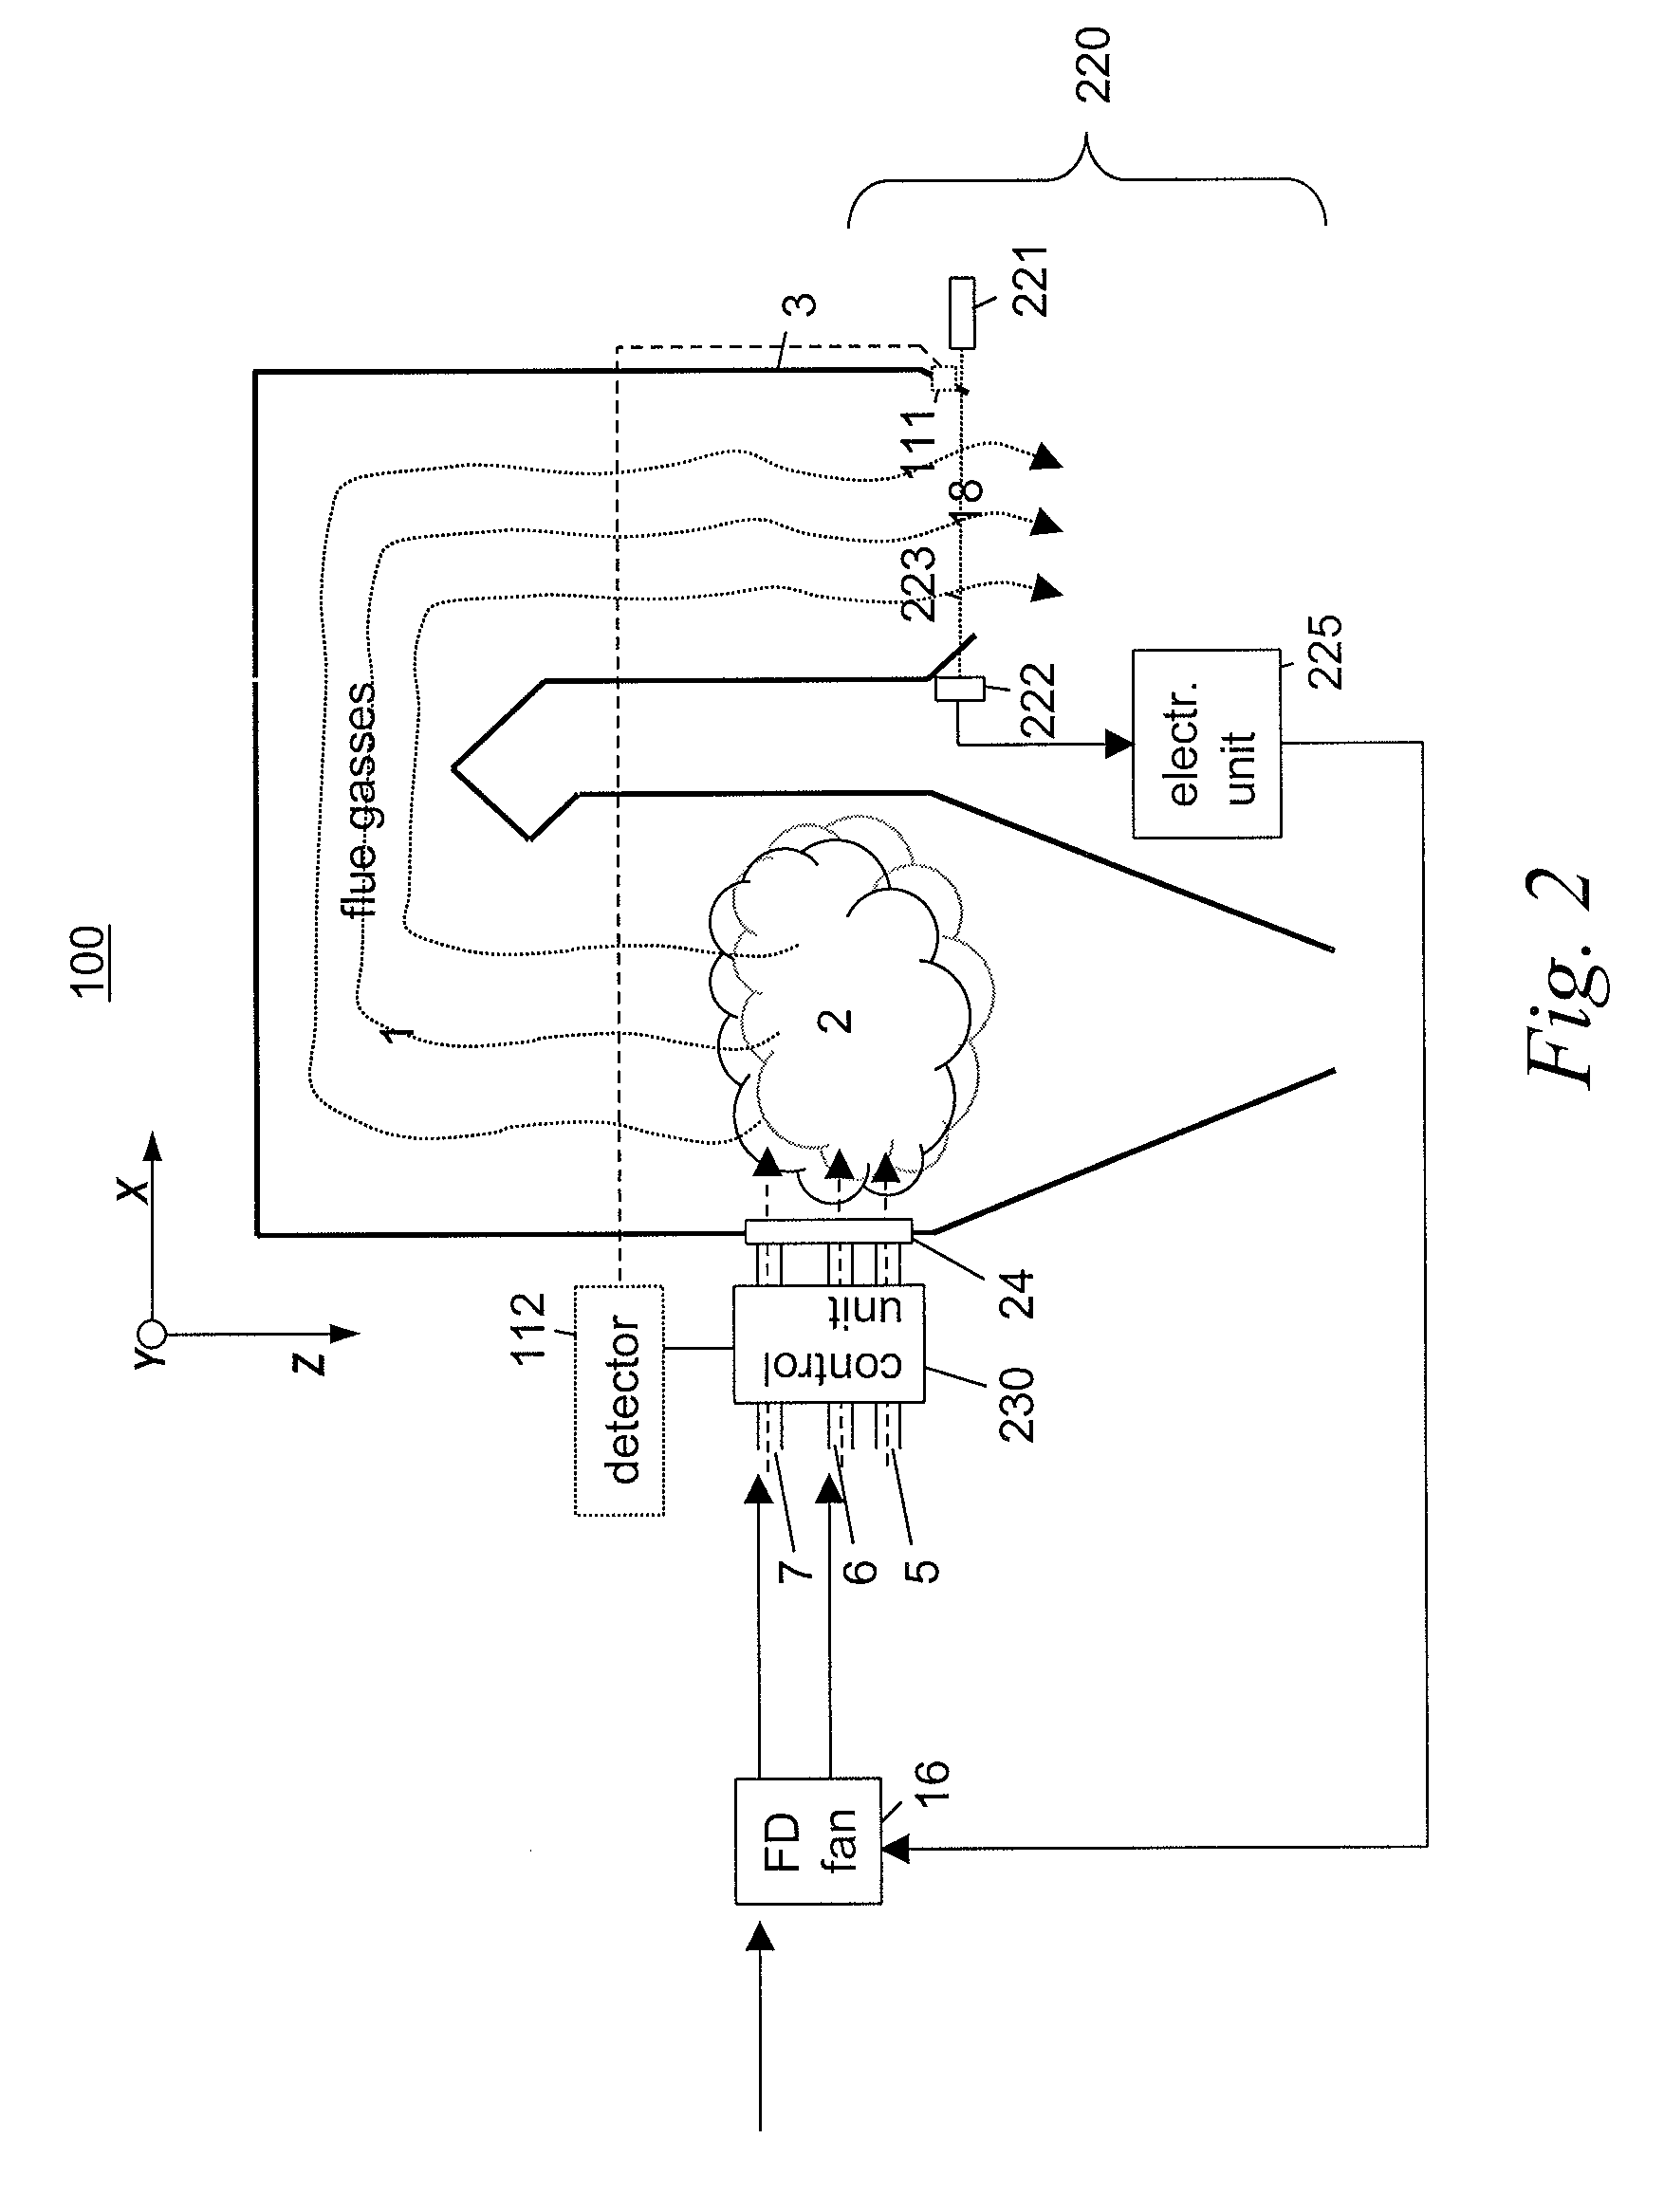 Optical flue gas monitor and control